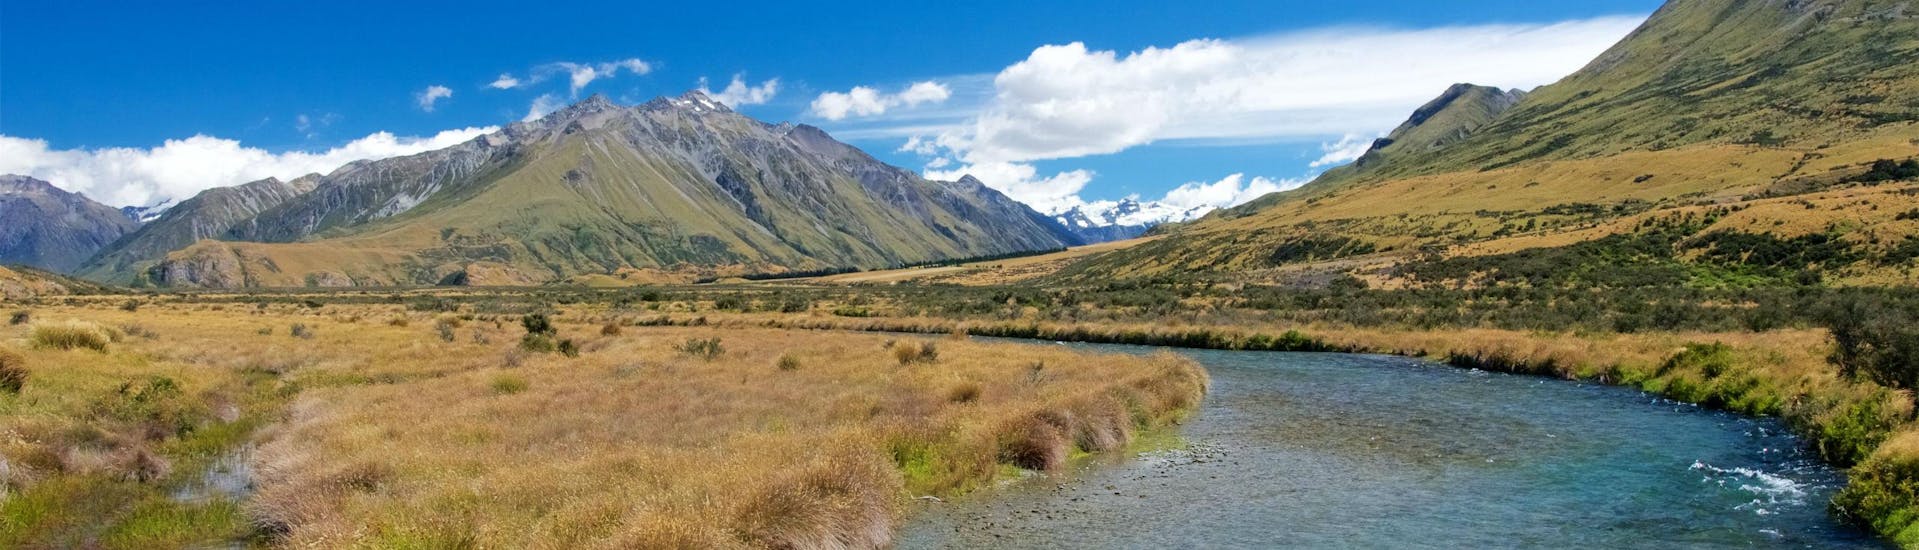 An image of the Rangitata River flowing past Mount Sunday, a popular river amongst those who want to go rafting near Christchurch.